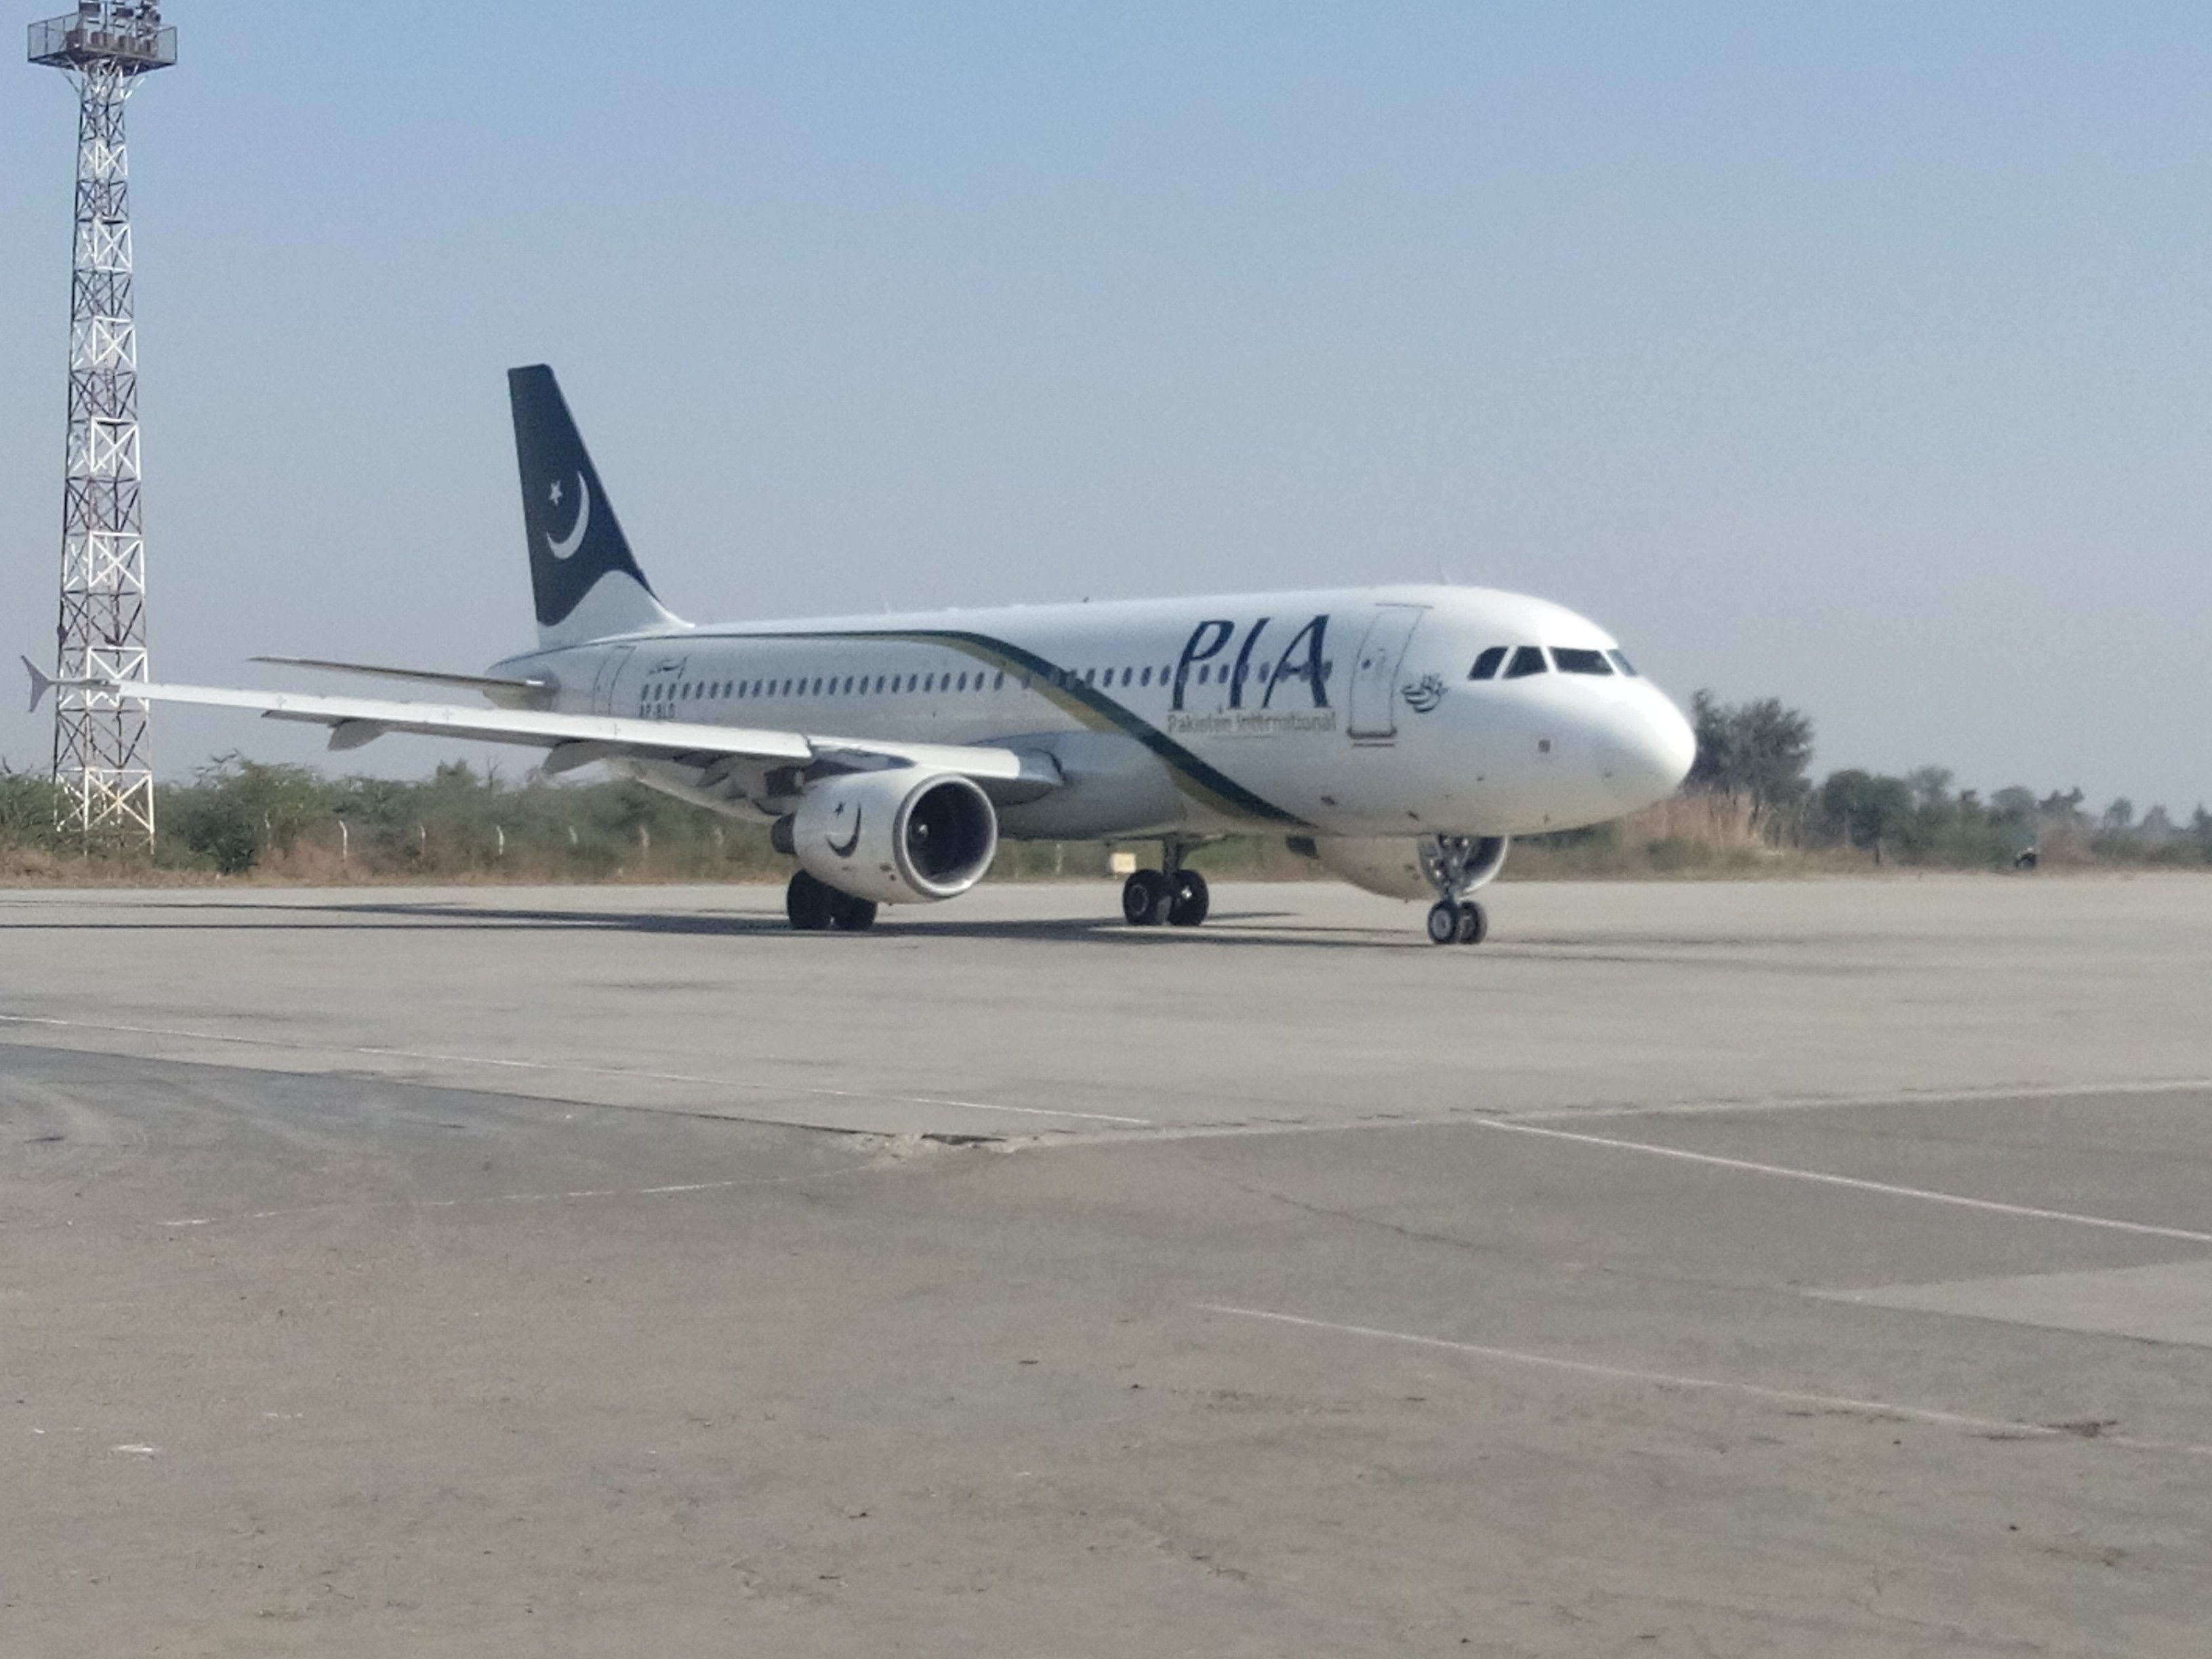 Pakistan International Airlines Airbus A320